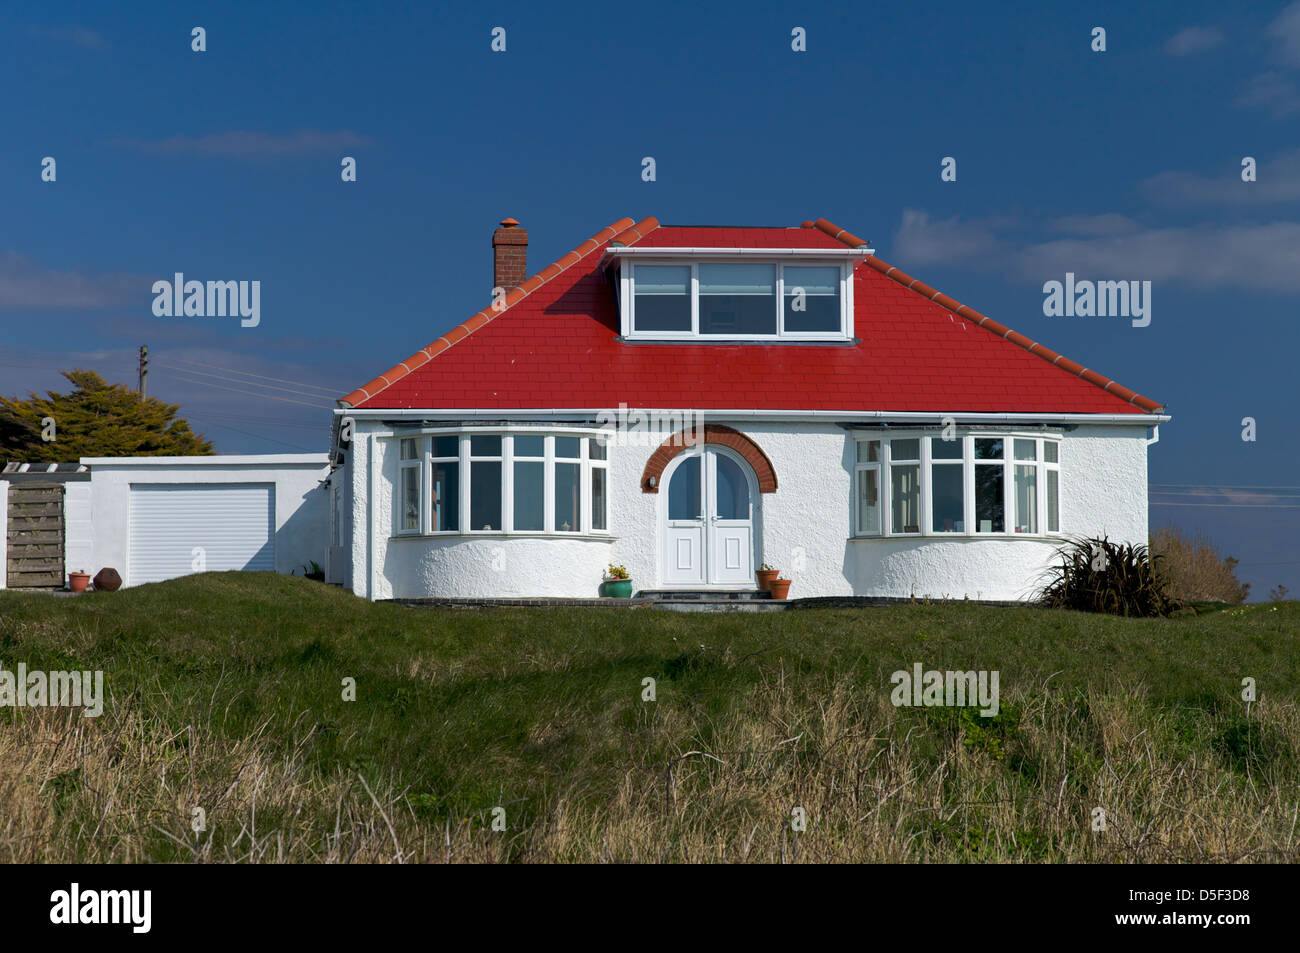 Bungalow with red roof, UK Stock Photo